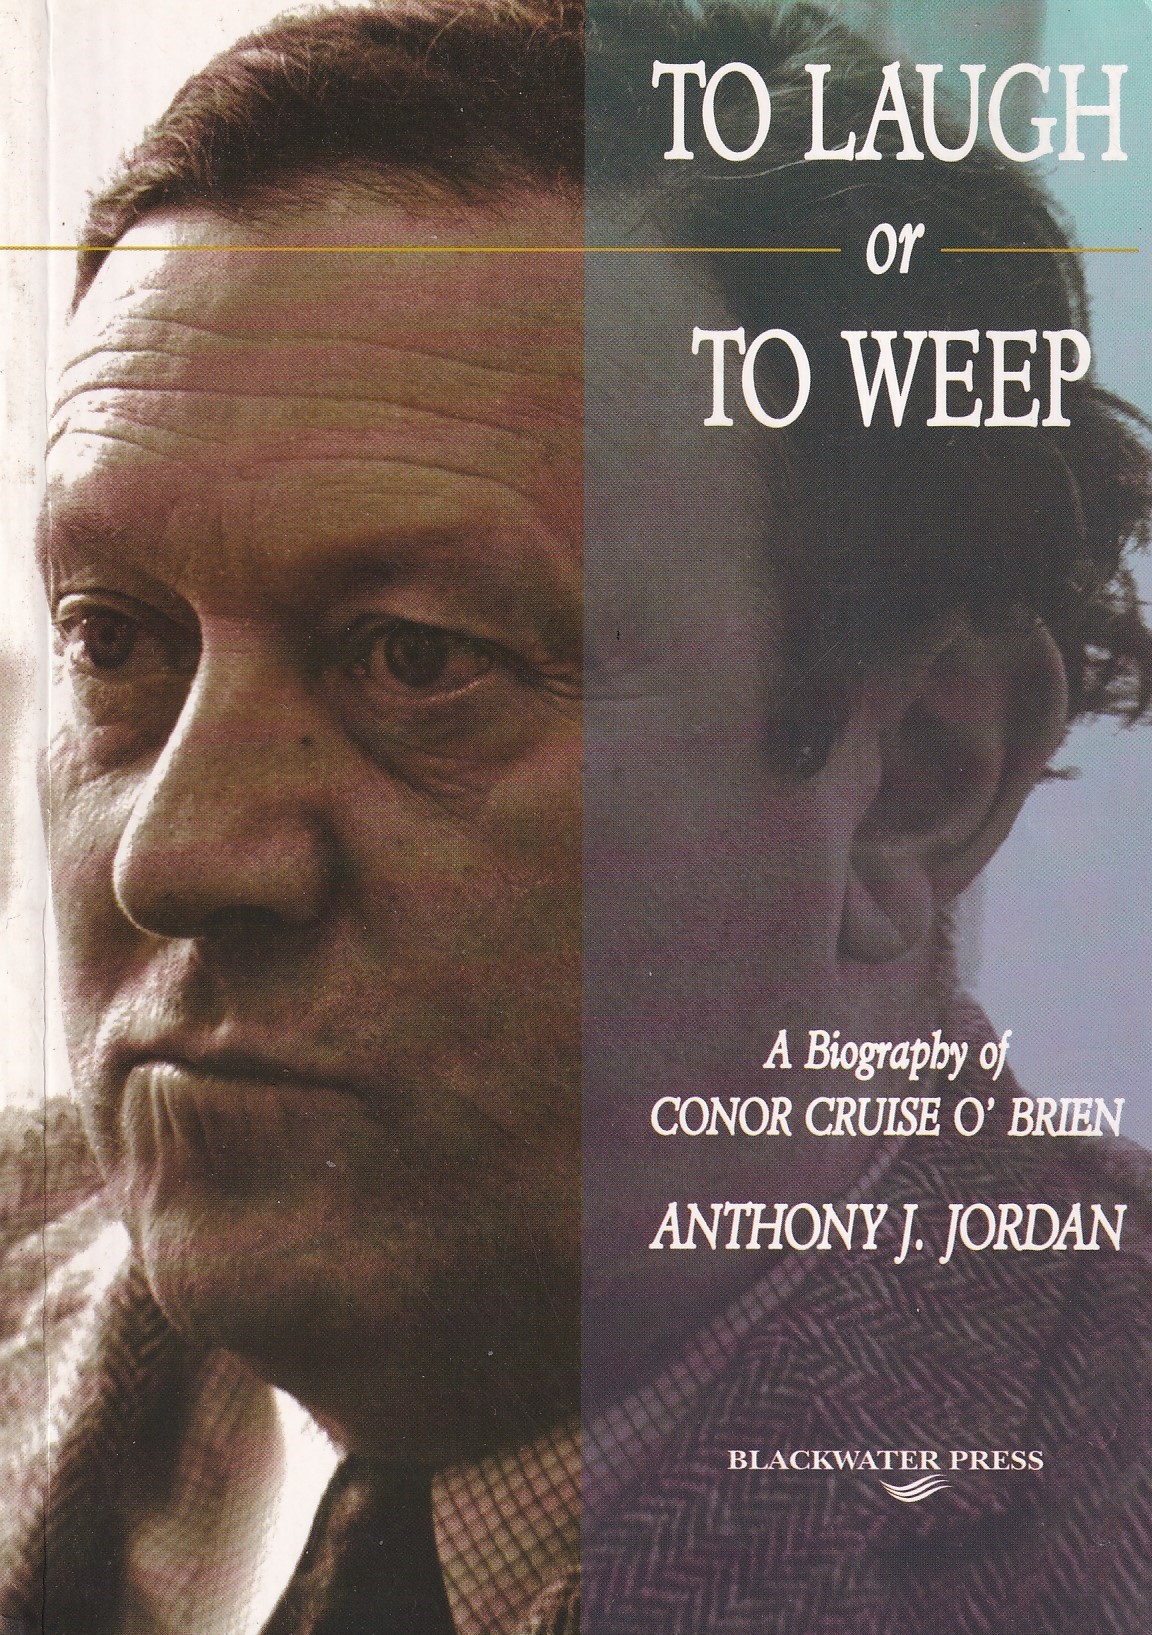 To Laugh or to Weep: A Biography of Conor Cruise O’Brien by Anthony J. Jordan